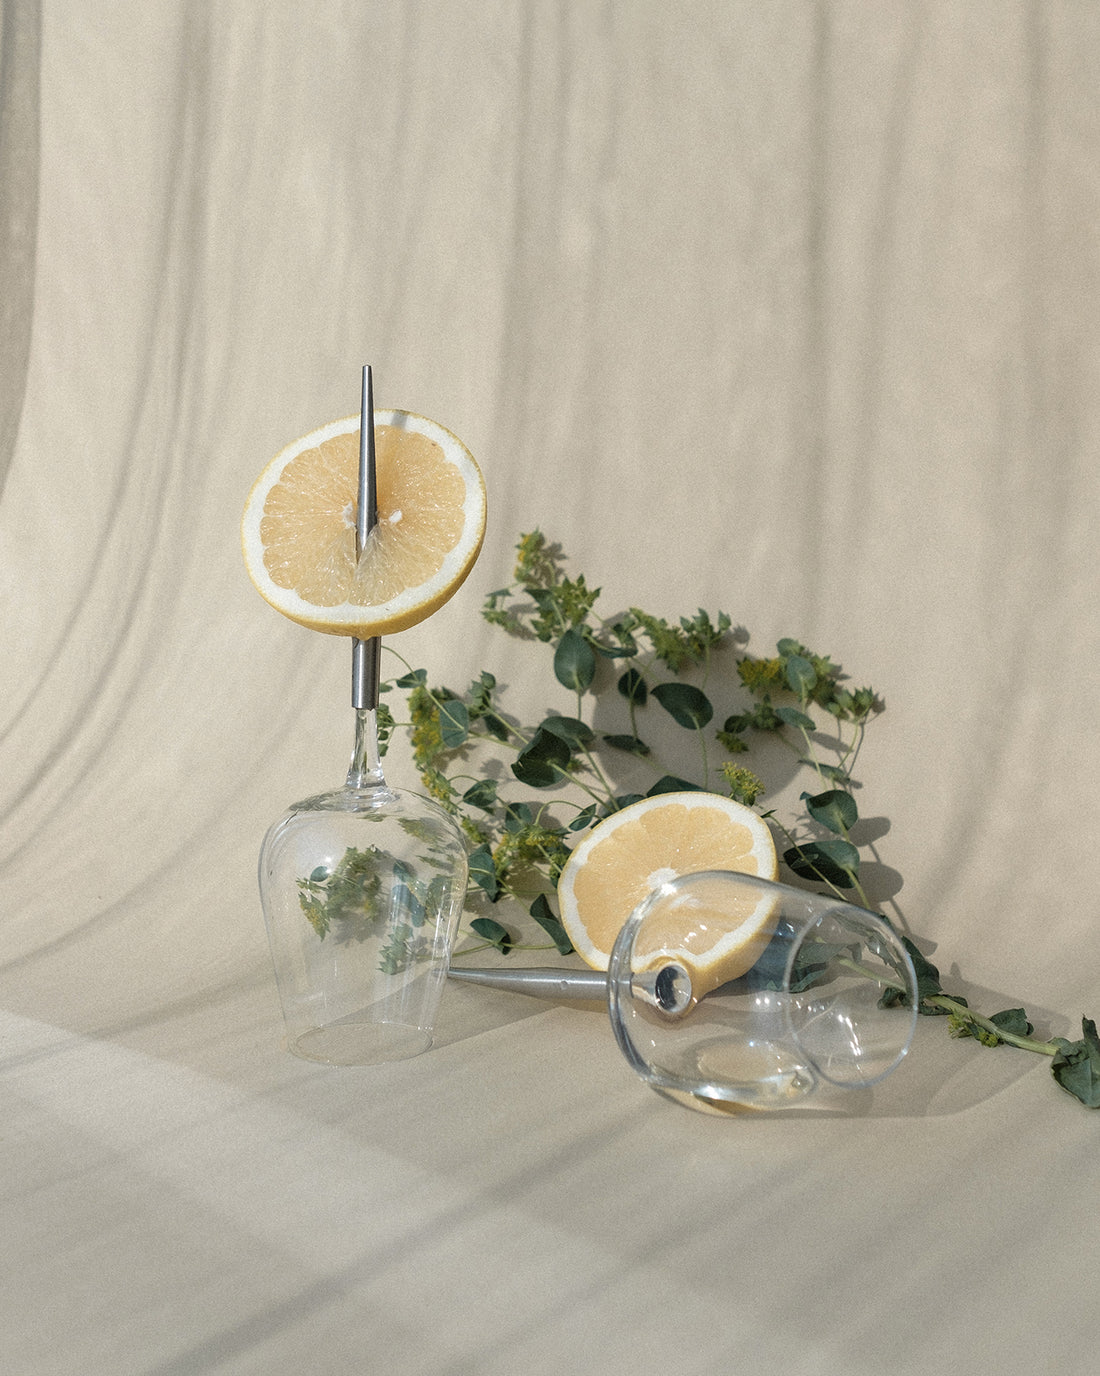 wine glasses with lemon halves and plants against a beige background